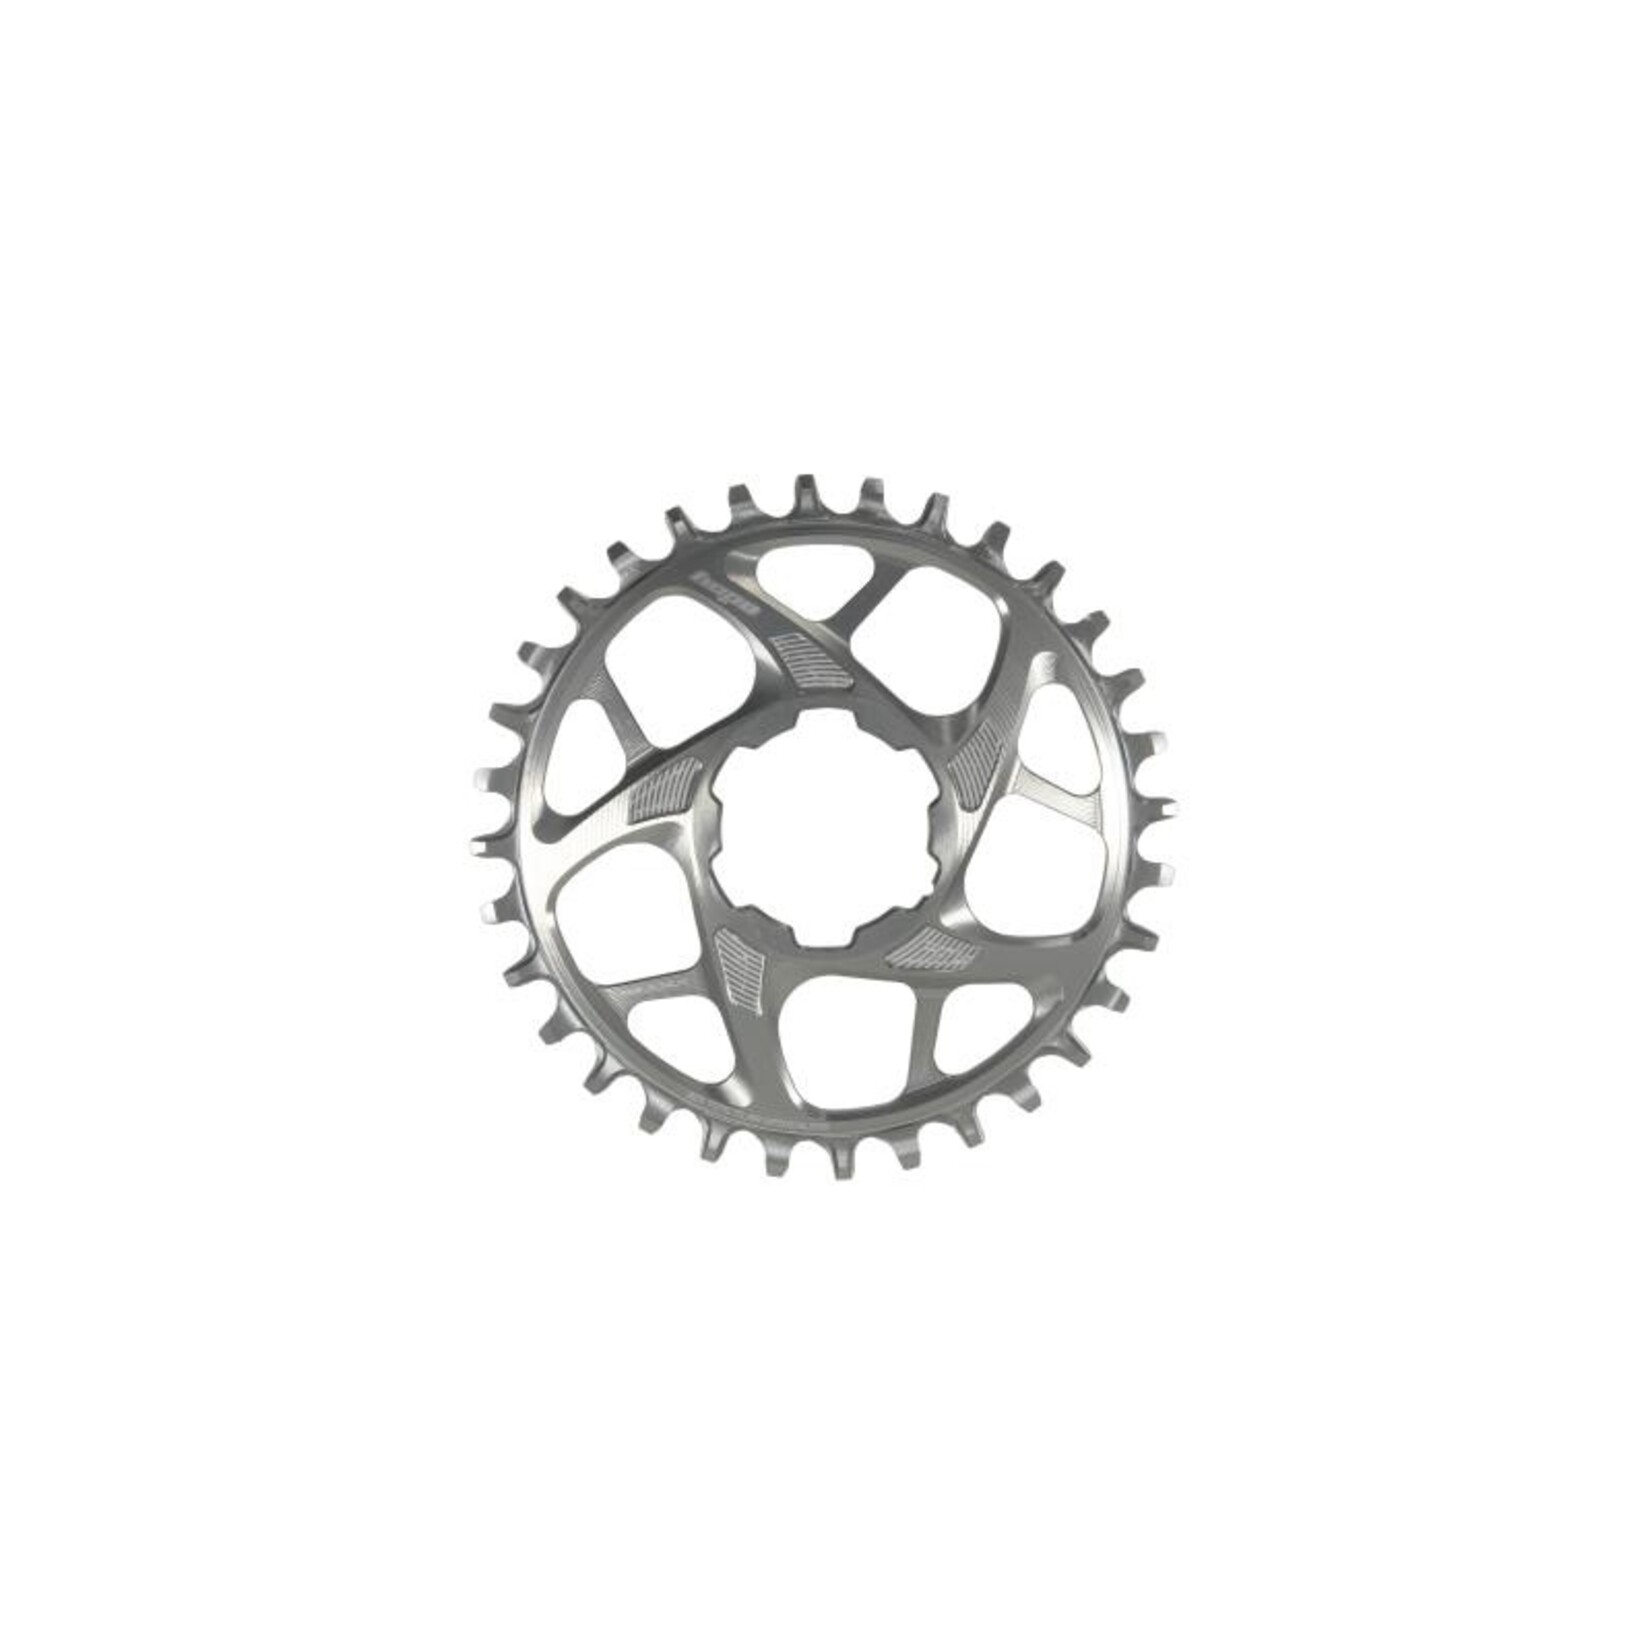 Hope Hope R22 Spiderless Chainring